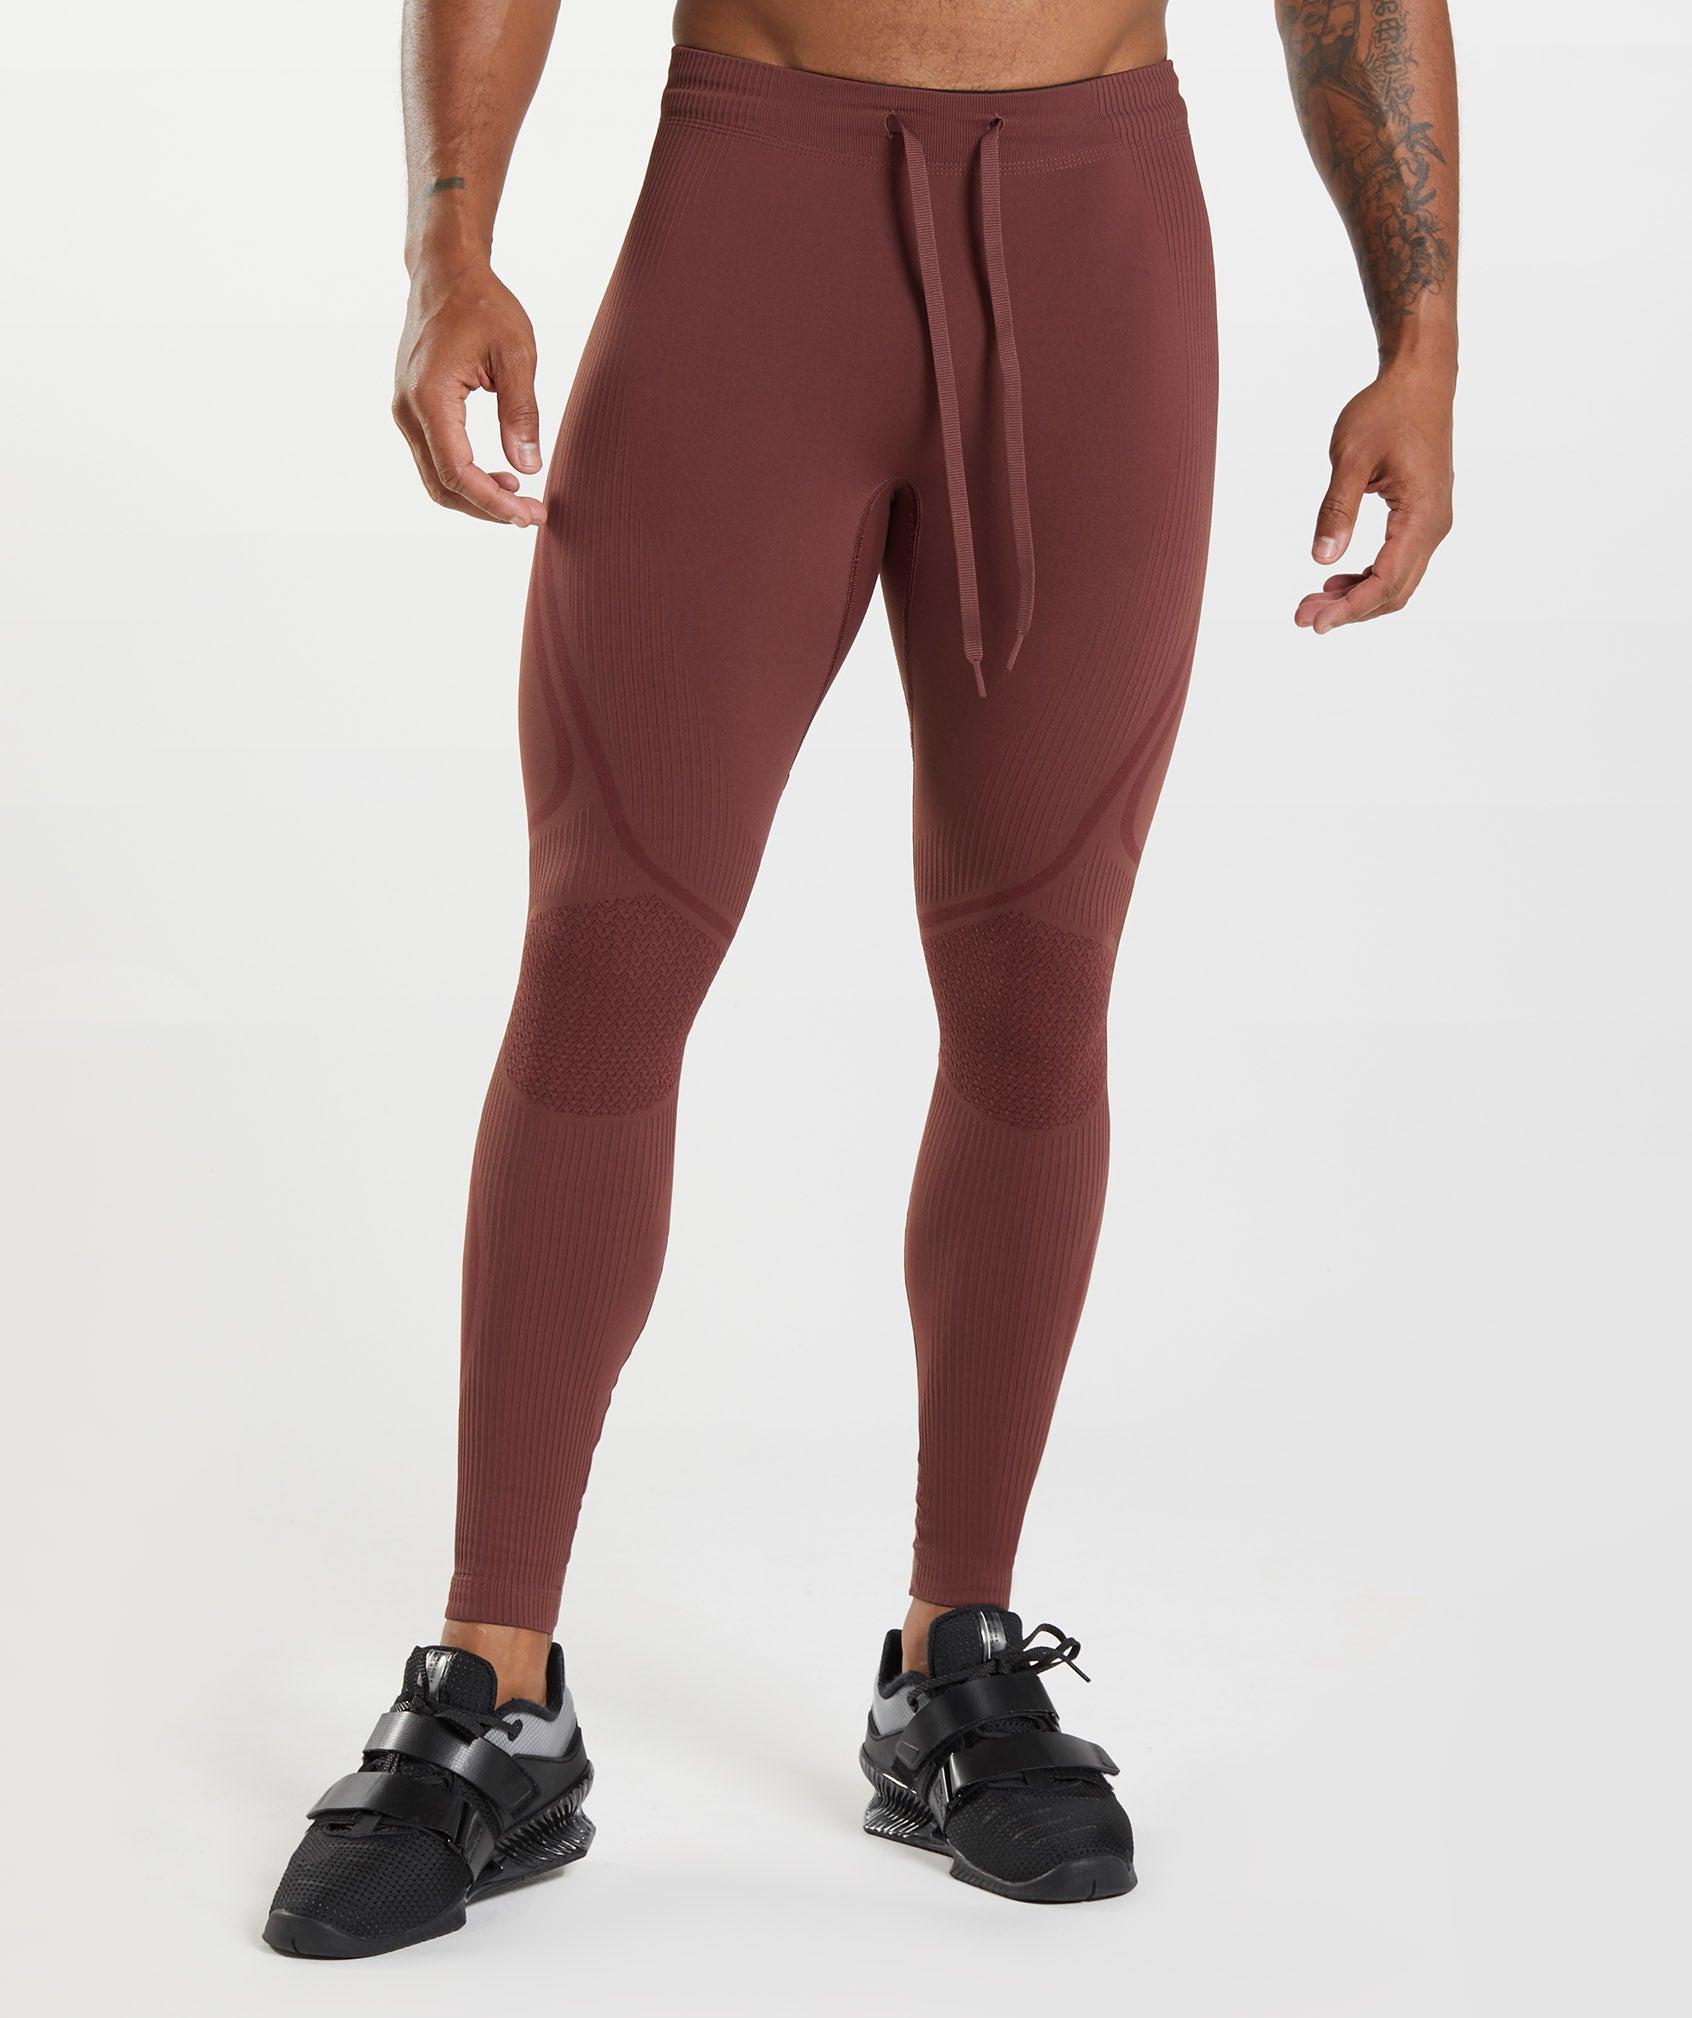 315 Seamless Tights in Cherry Brown/Athletic Maroon - view 1